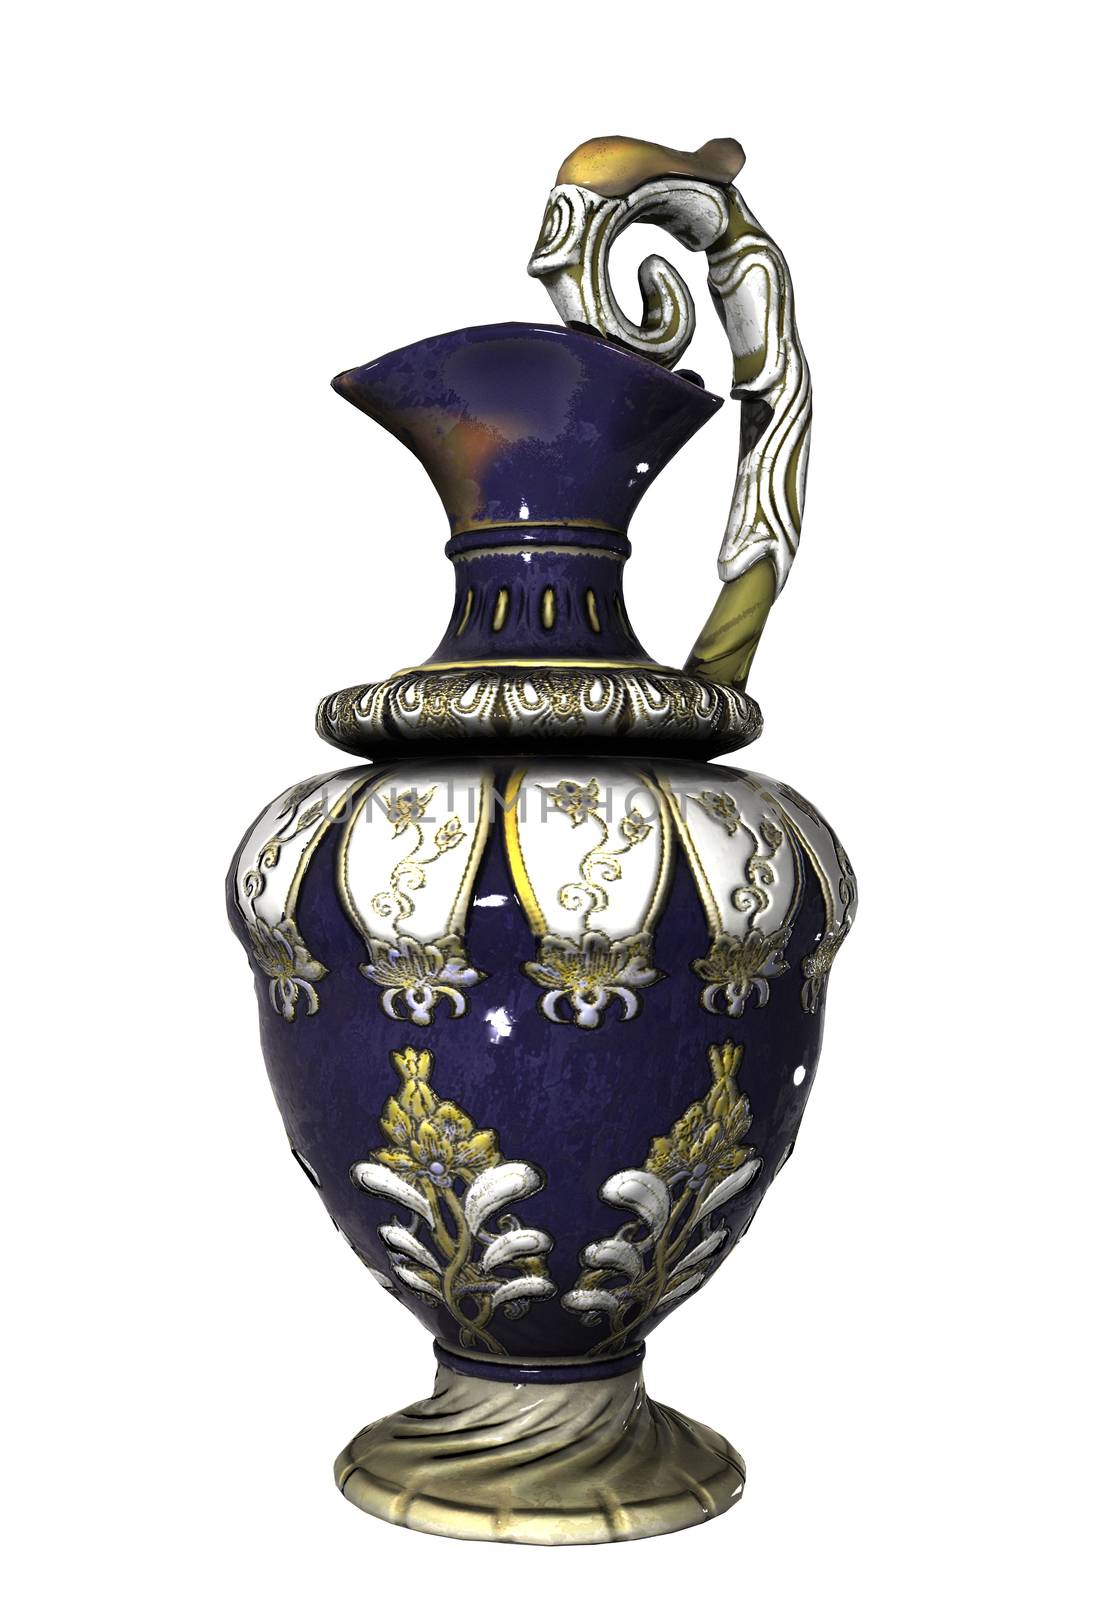 Ornate chinese ceramic or porcelain vase, with decorative flower patterns, isolated against a white background.